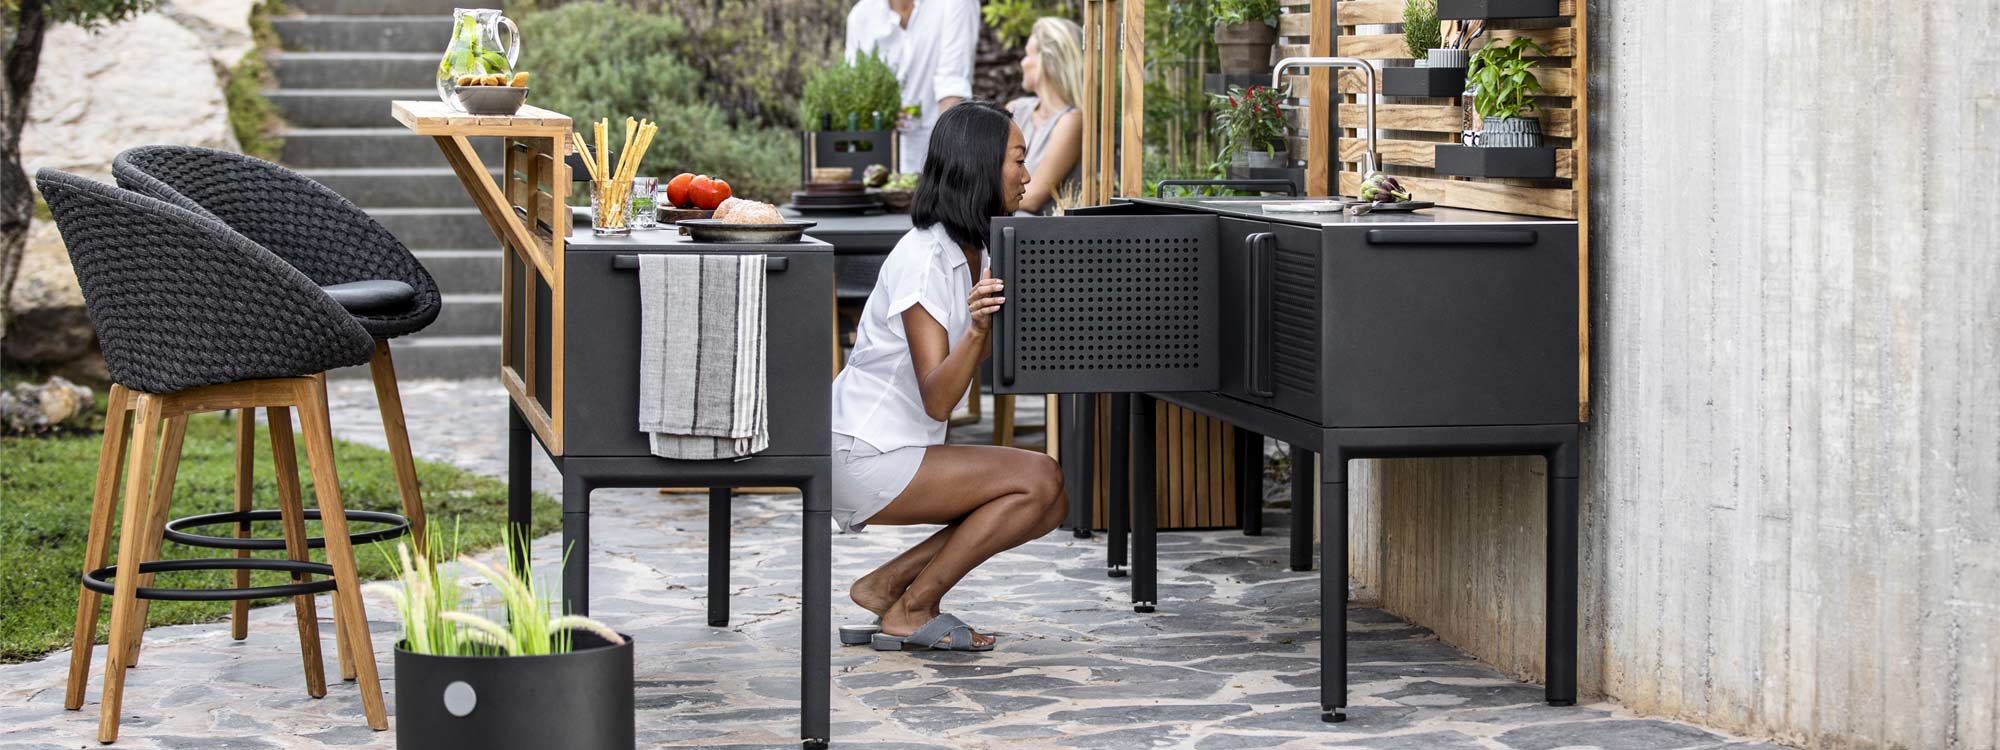 Image of pair of Caneline Peacock bar stools next to Drop outdoor kitchen island